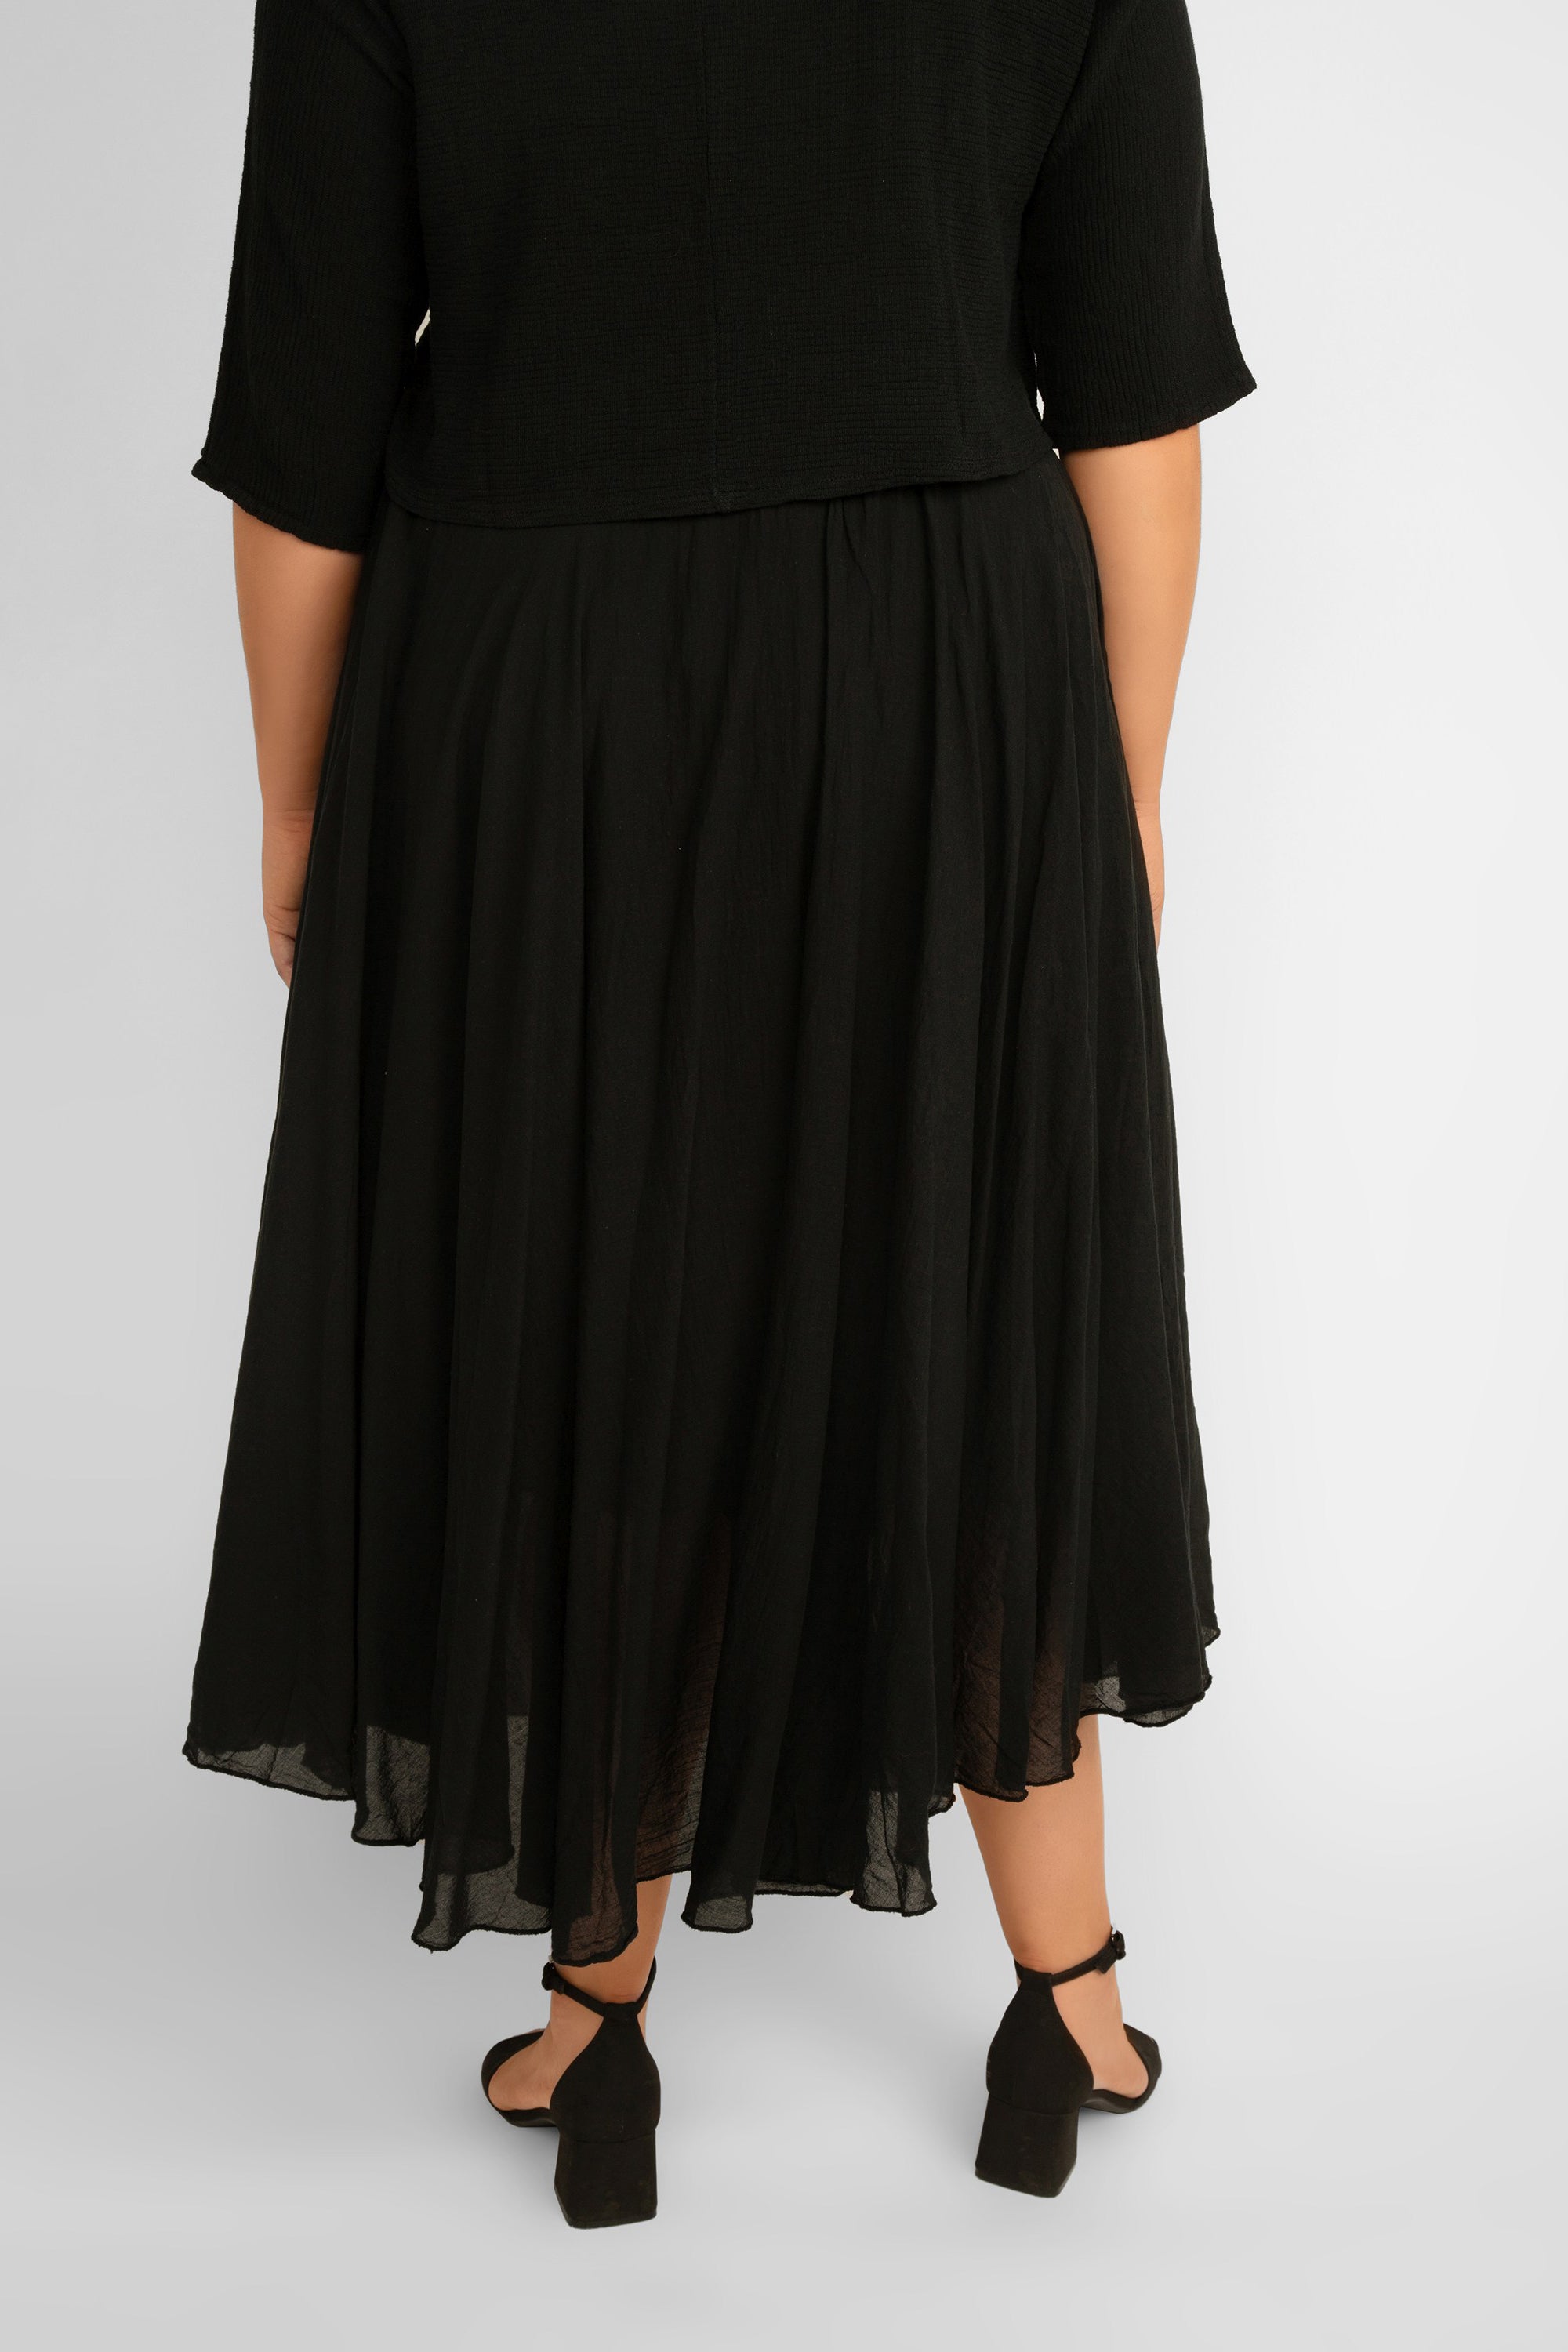 Back view of Me & Gee (L-6759) Flowy Cotton Maxi Skirt in Black